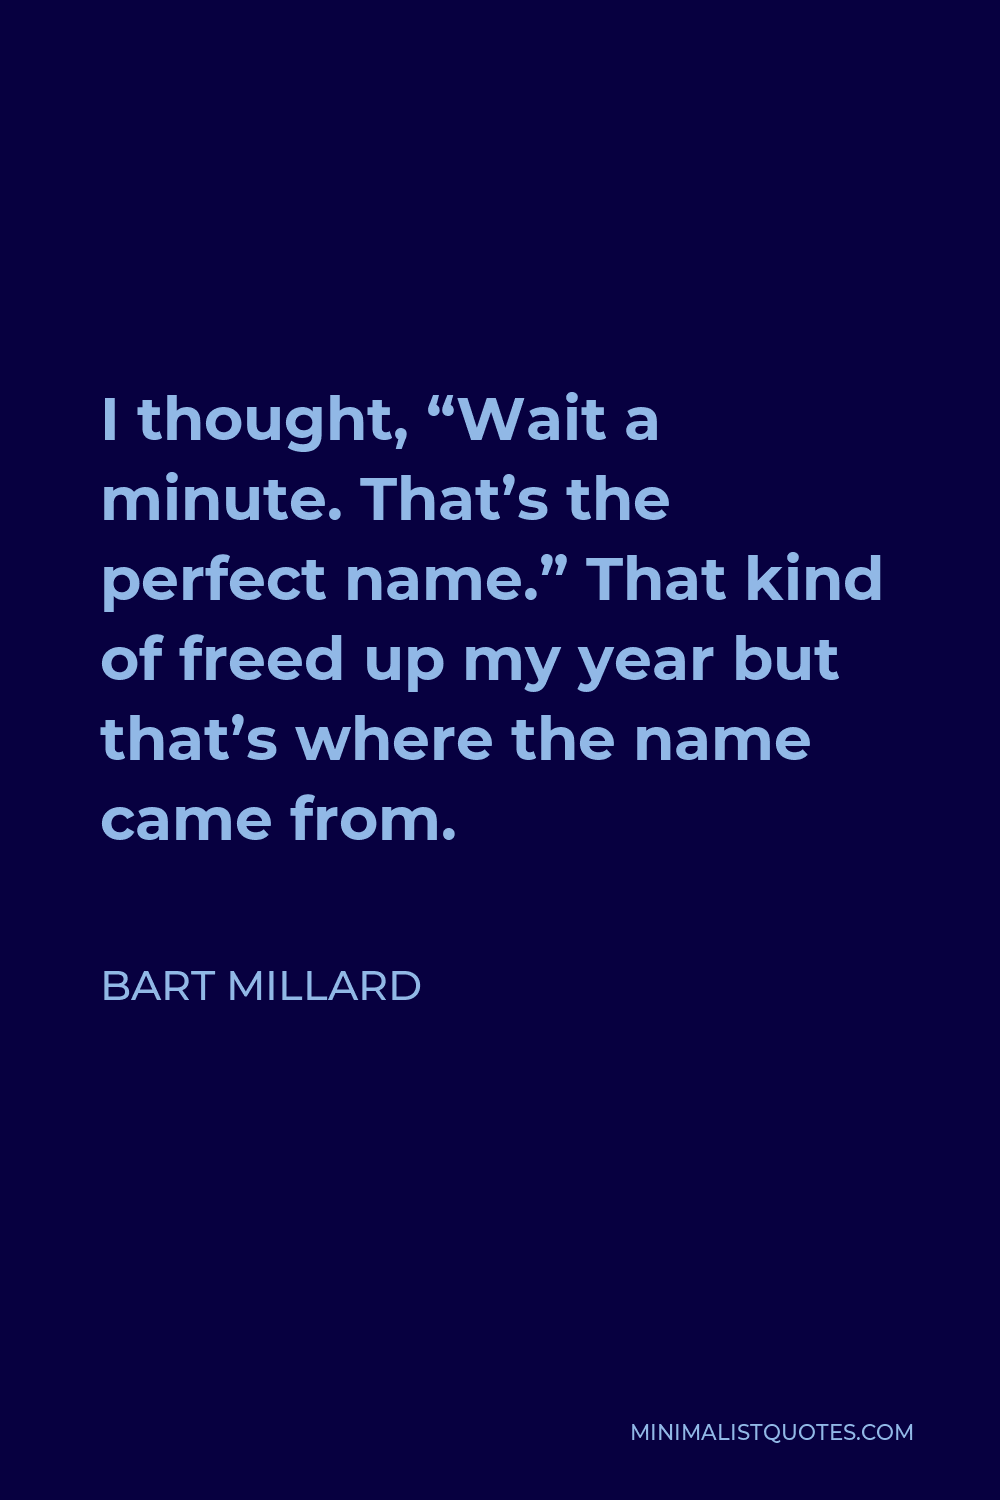 Bart Millard Quote - I thought, “Wait a minute. That’s the perfect name.” That kind of freed up my year but that’s where the name came from.